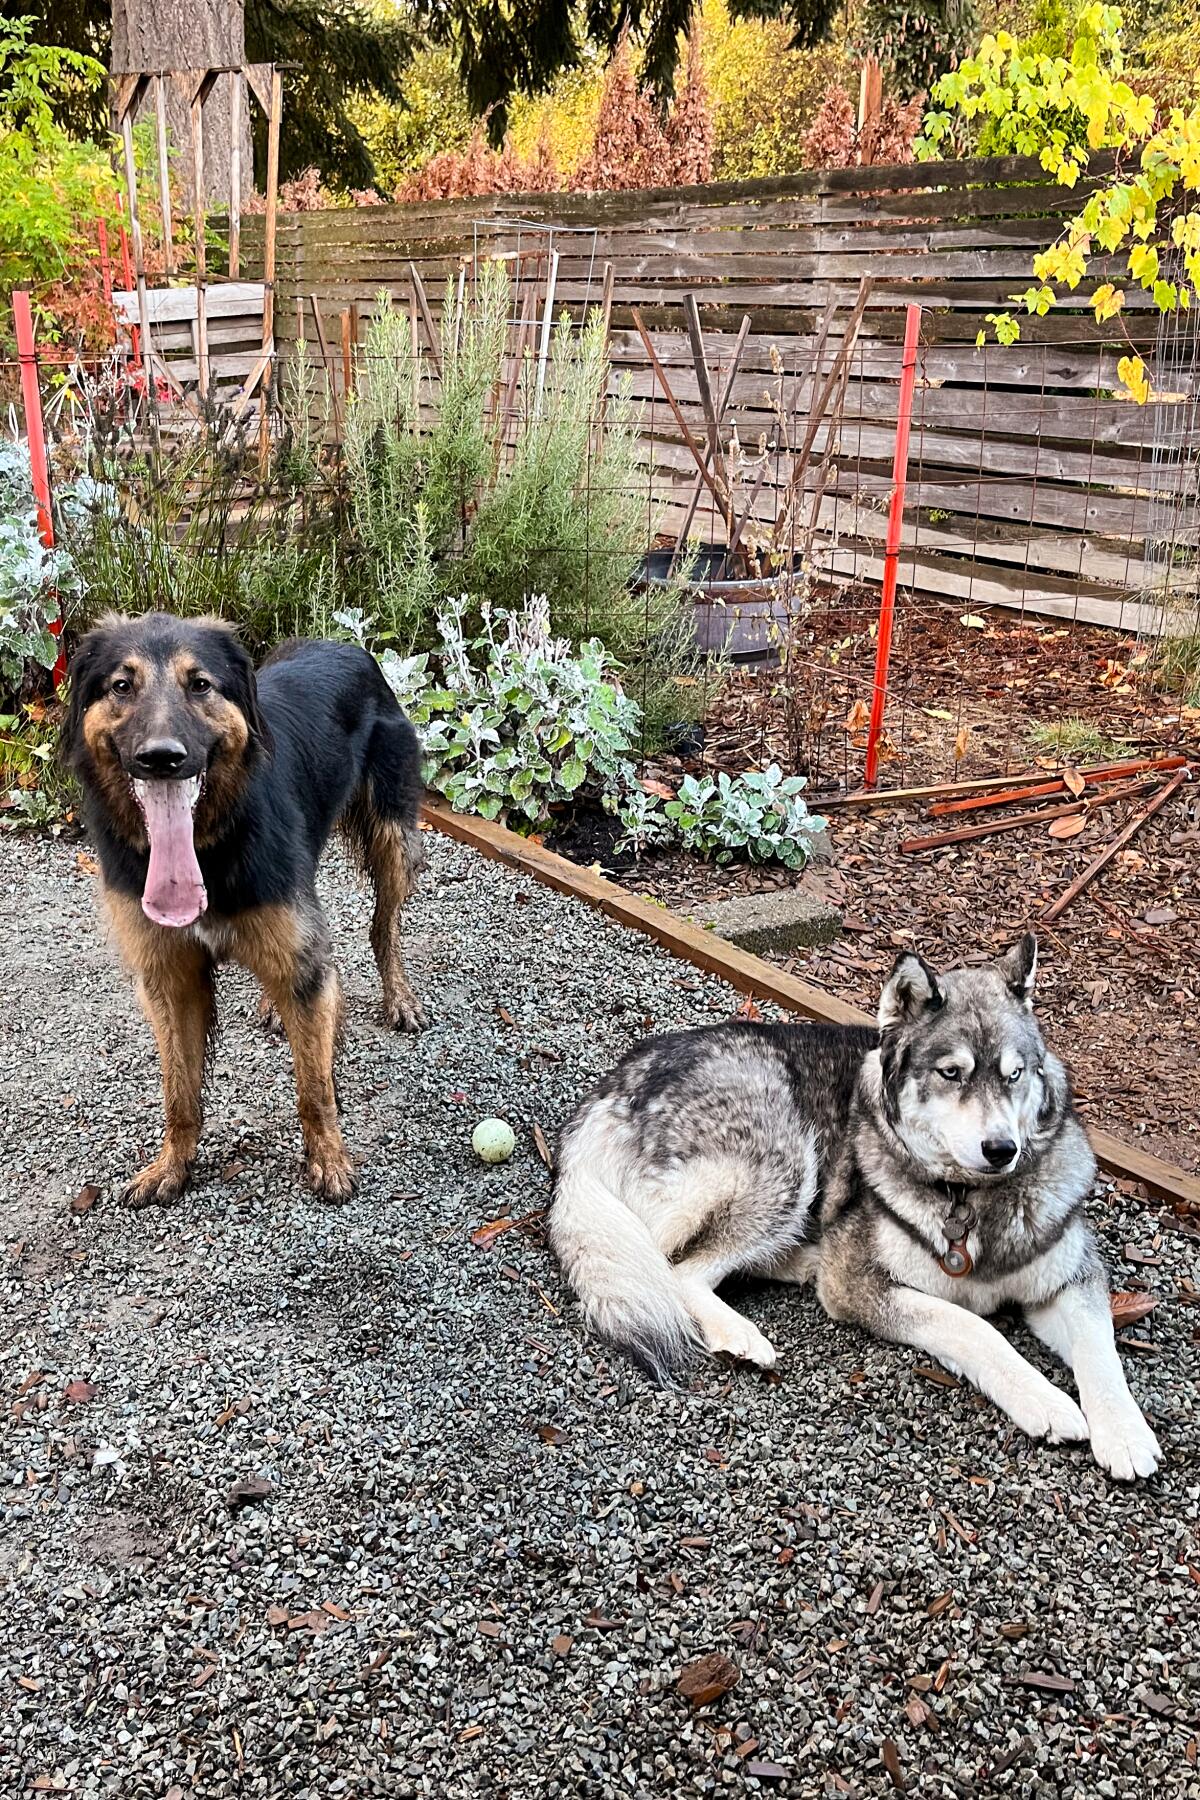 A black and brown dog and a black and white dog in a yard.